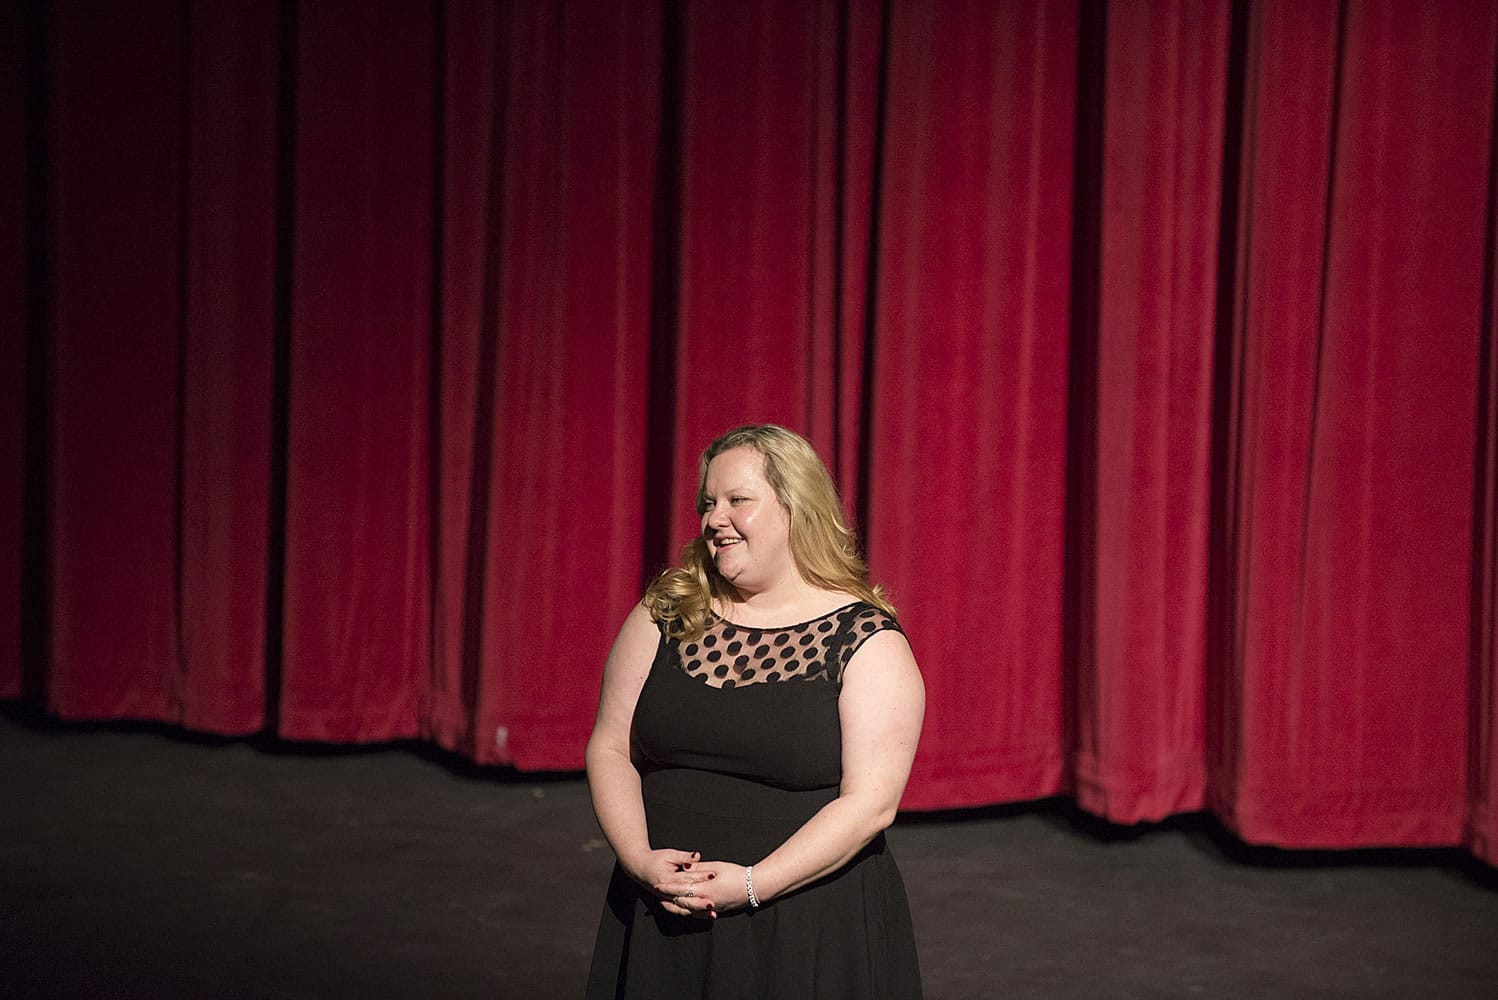 Director Margaret Gorman, Evergreen High School's new drama teacher, greets the audience before "The Three Musketeers" on Thursday at Evergreen High School's theater.